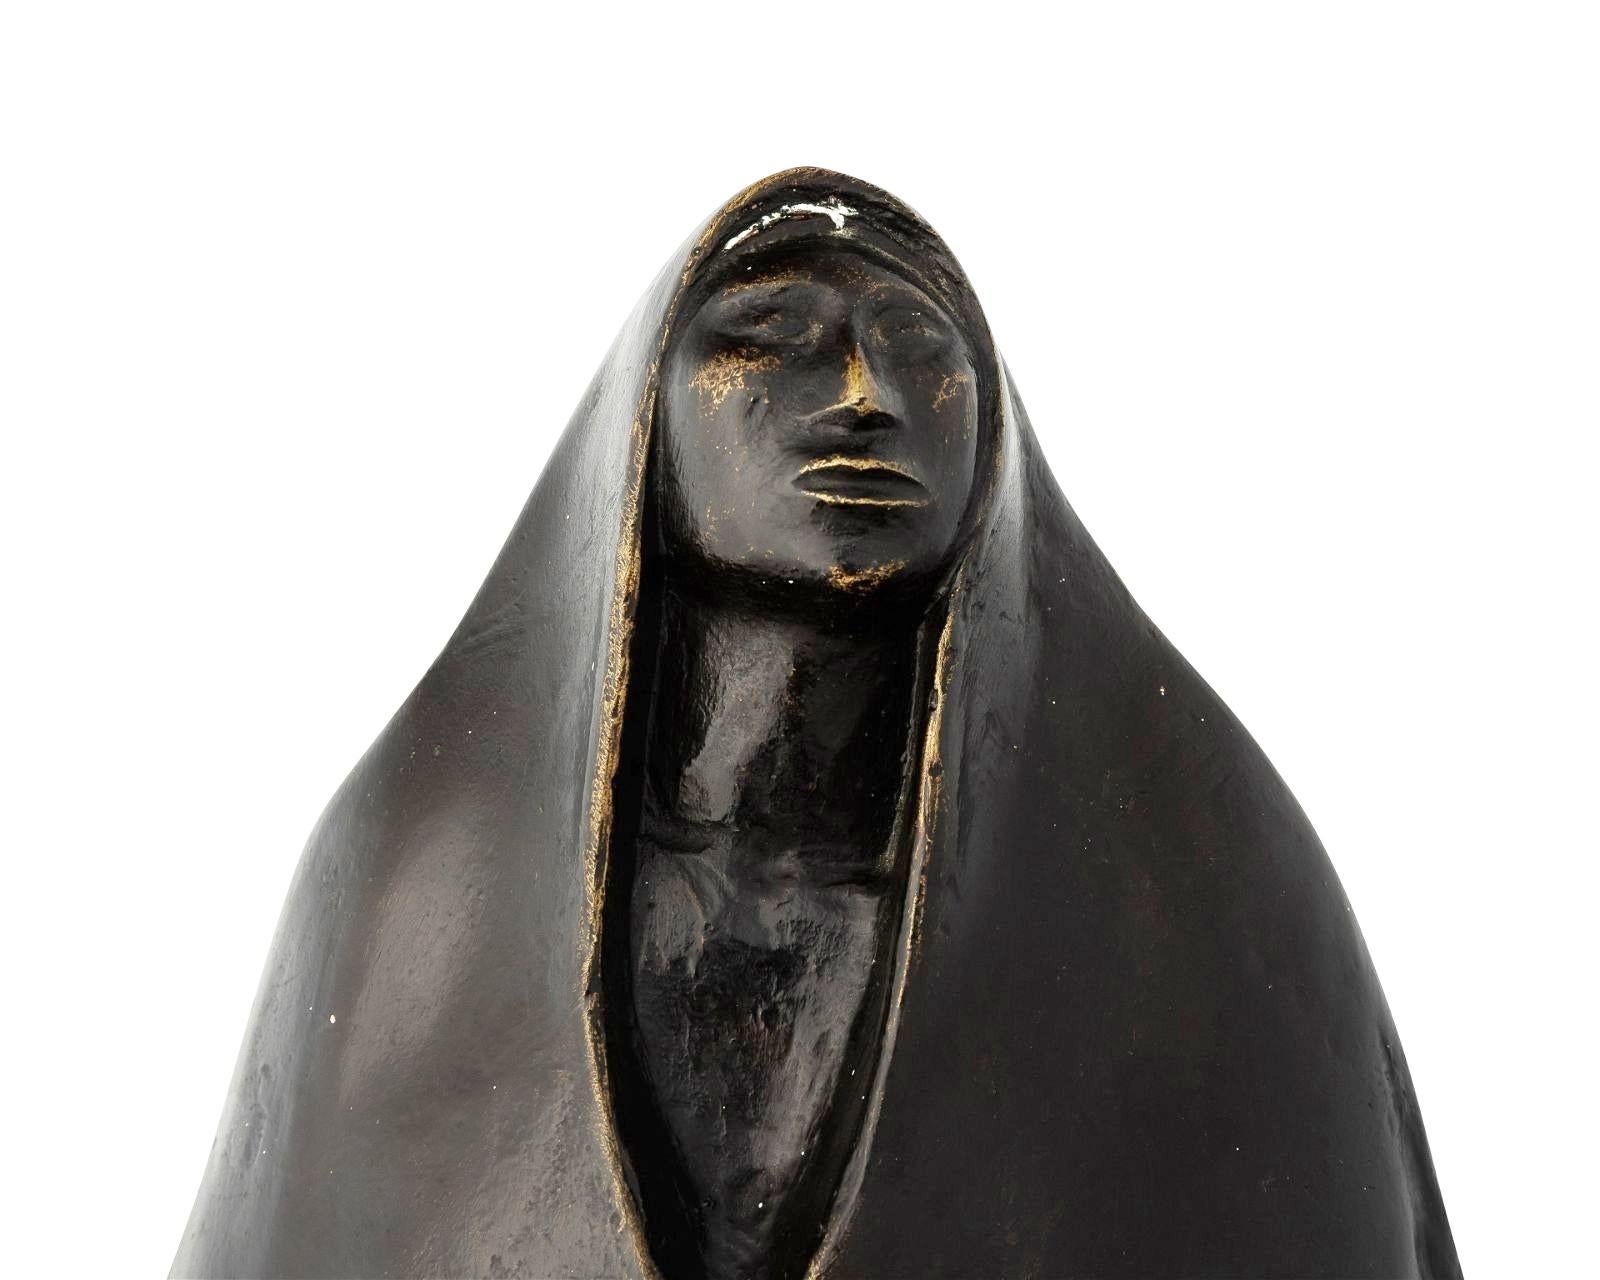 North American Bronze Sculpture by Jorge Luis Cuevas (Mexico 1922) Dated, Signed & Numbered For Sale